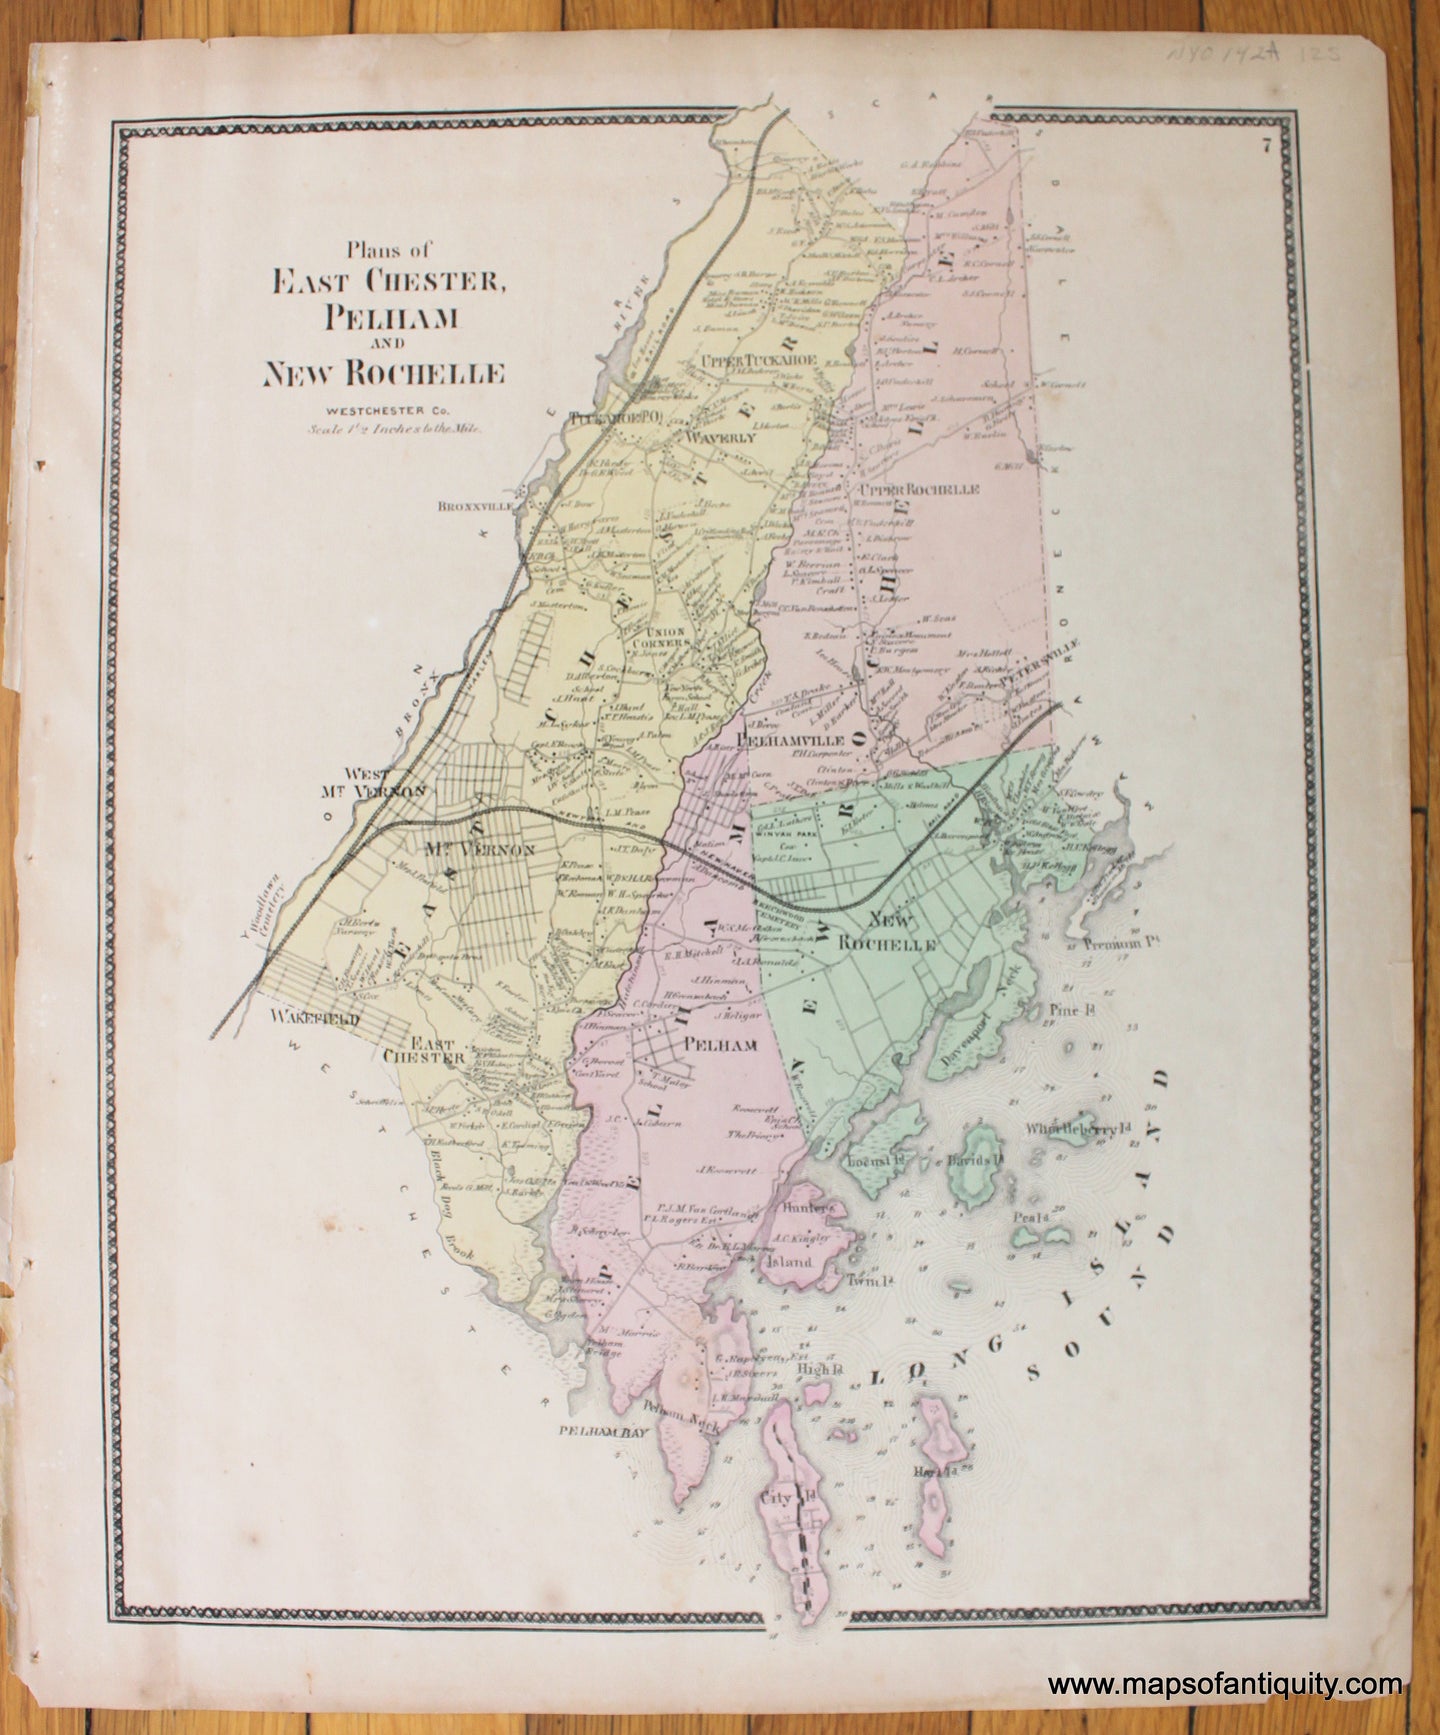 Antique-Map-Plans-of-East-Chester-Pelham-and-New-Rochelle-Westchester-Co.-N.Y.